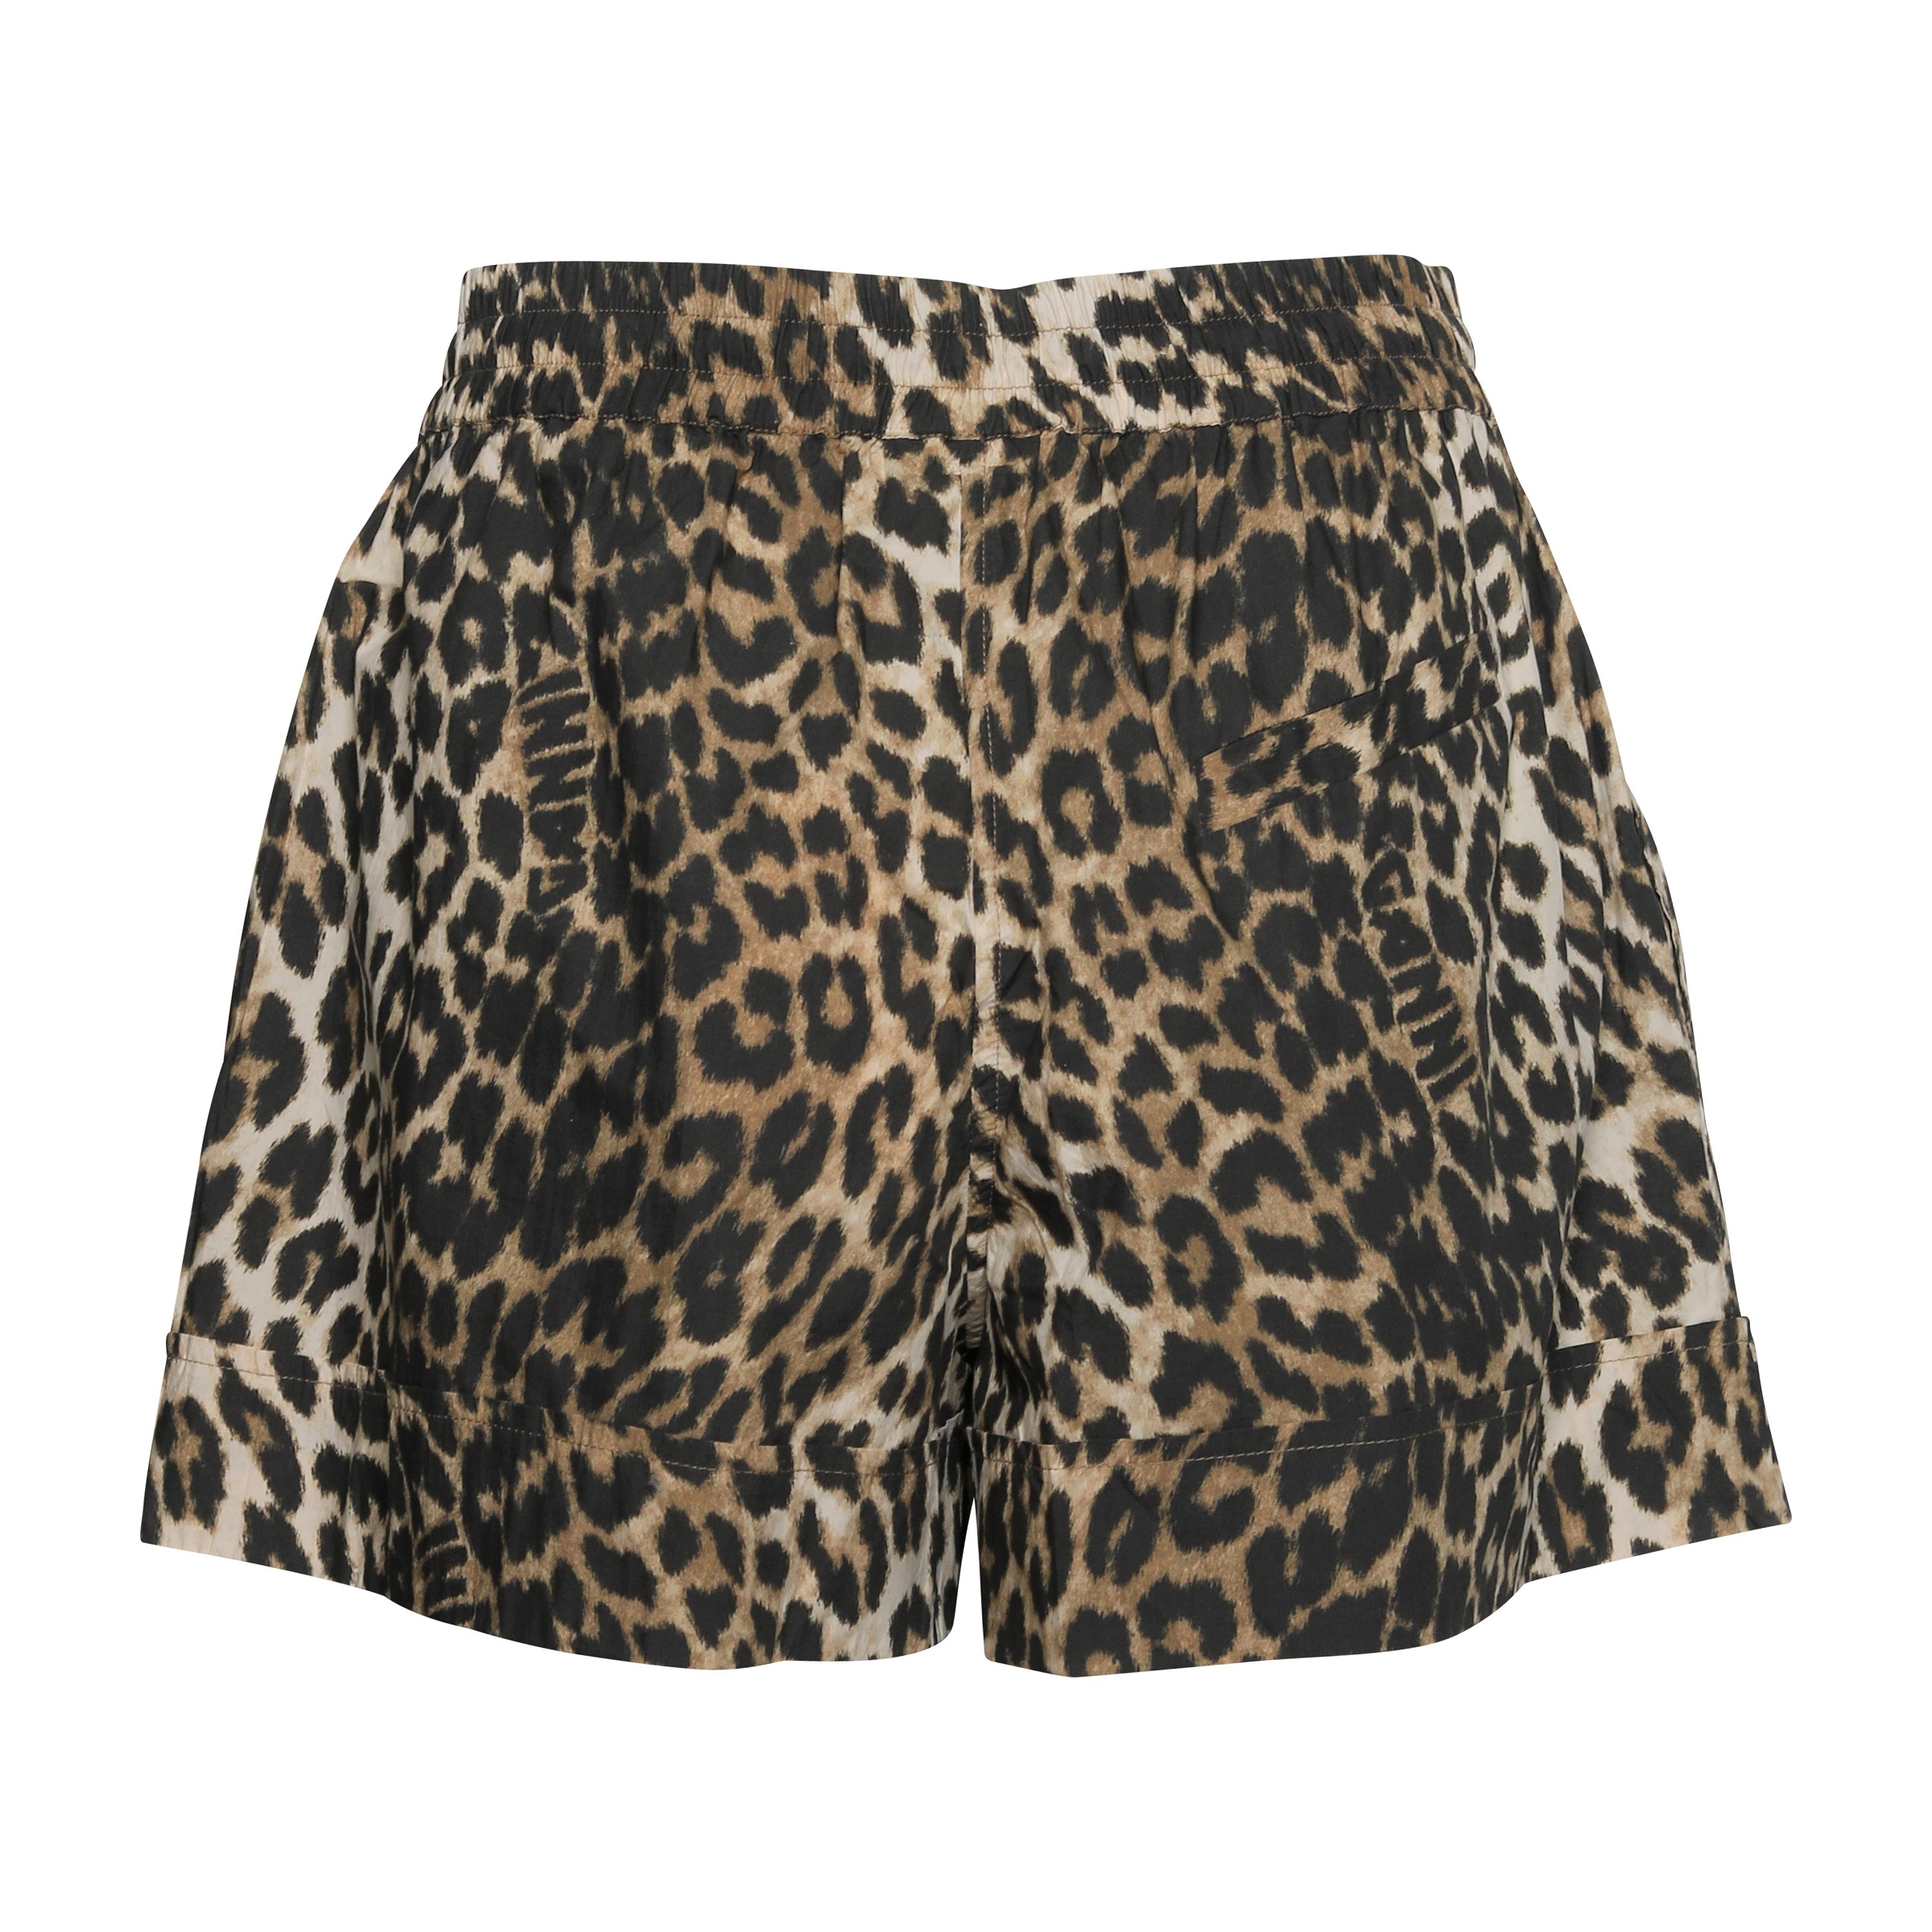 GANNI Printed Cotton Elasticated Shorts in Leopard 36